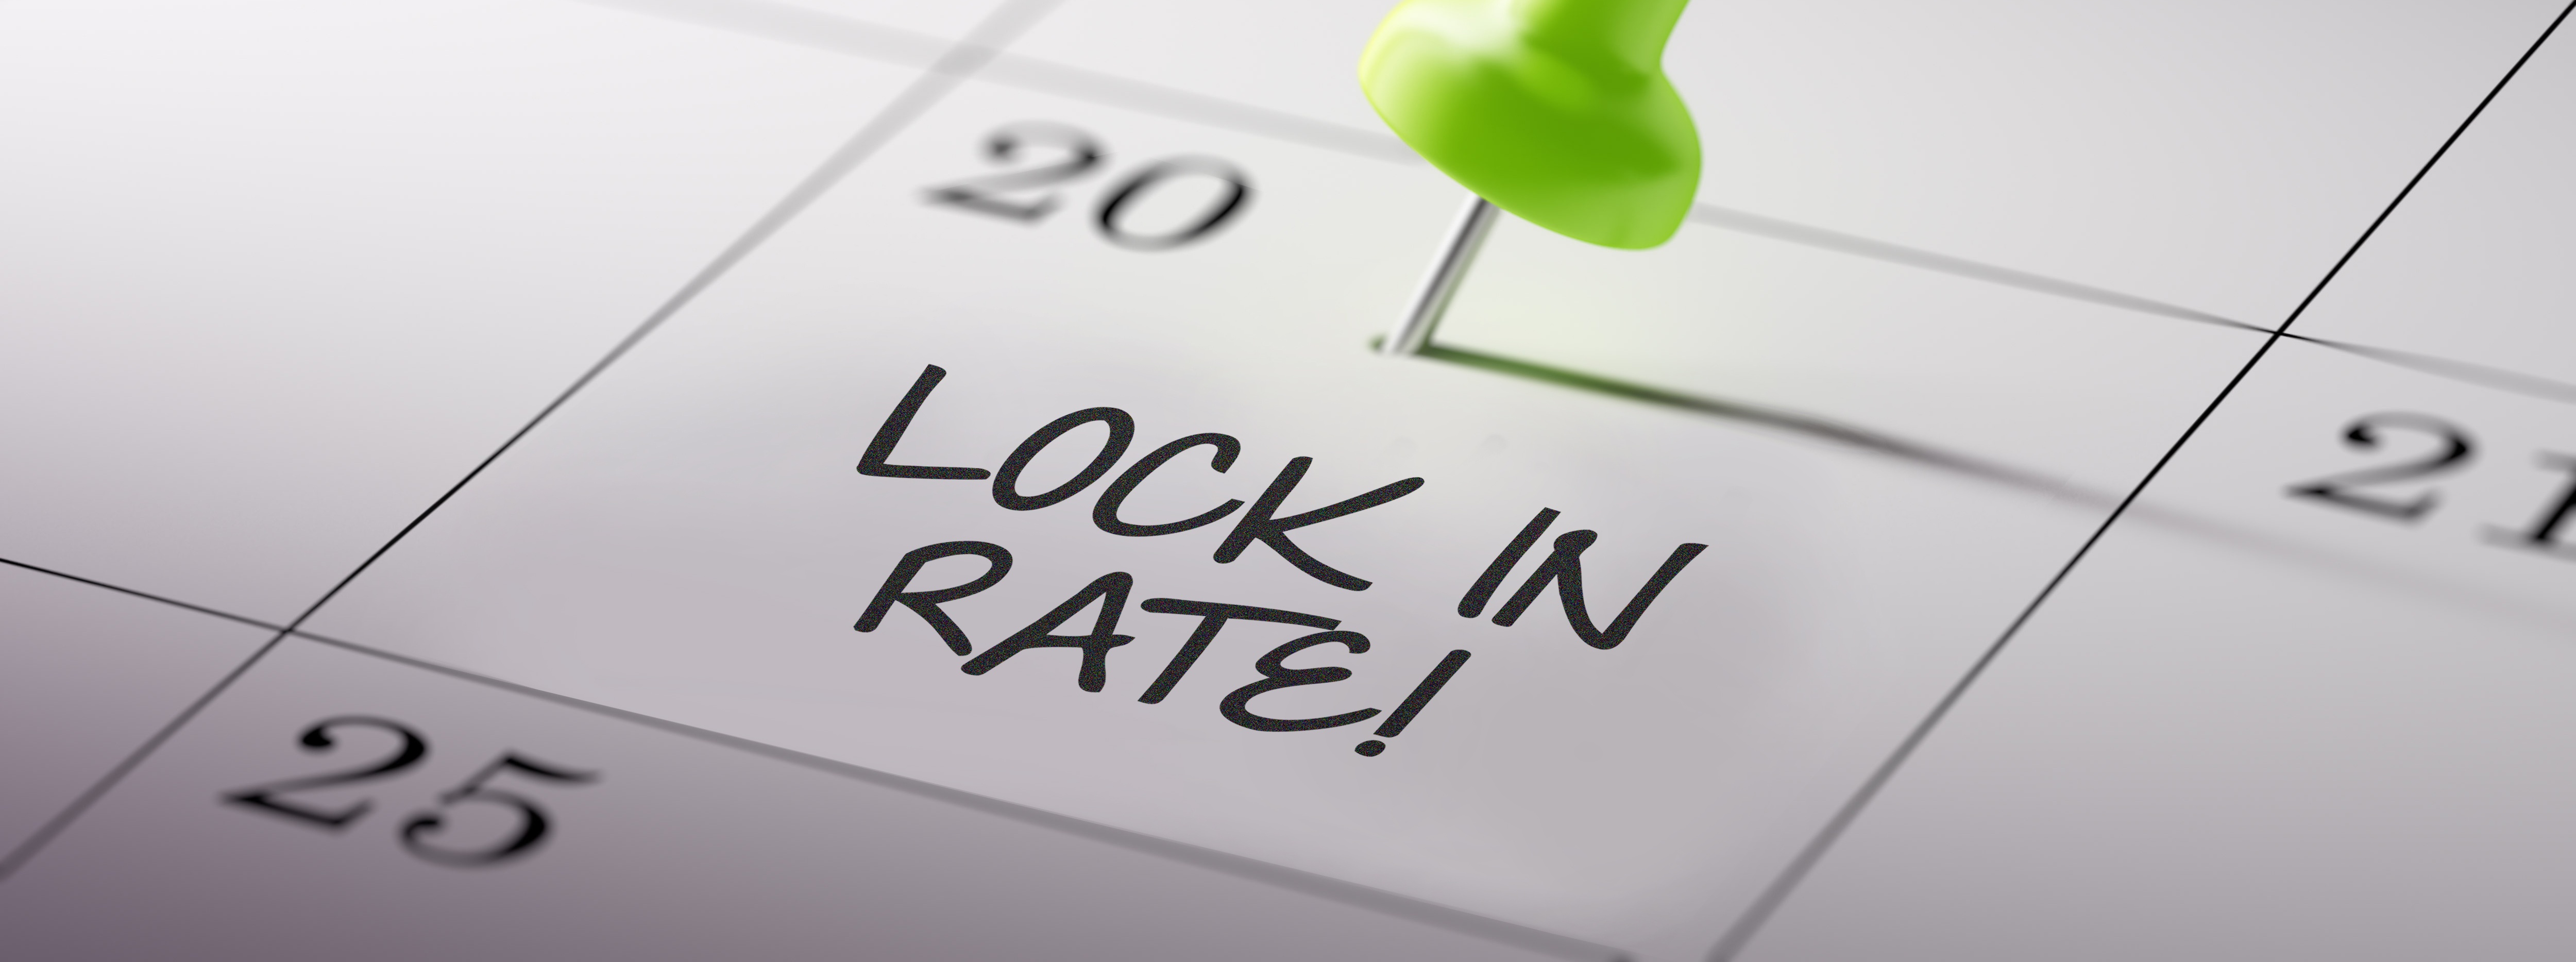 lock-in-mortgage-rate-ced75b